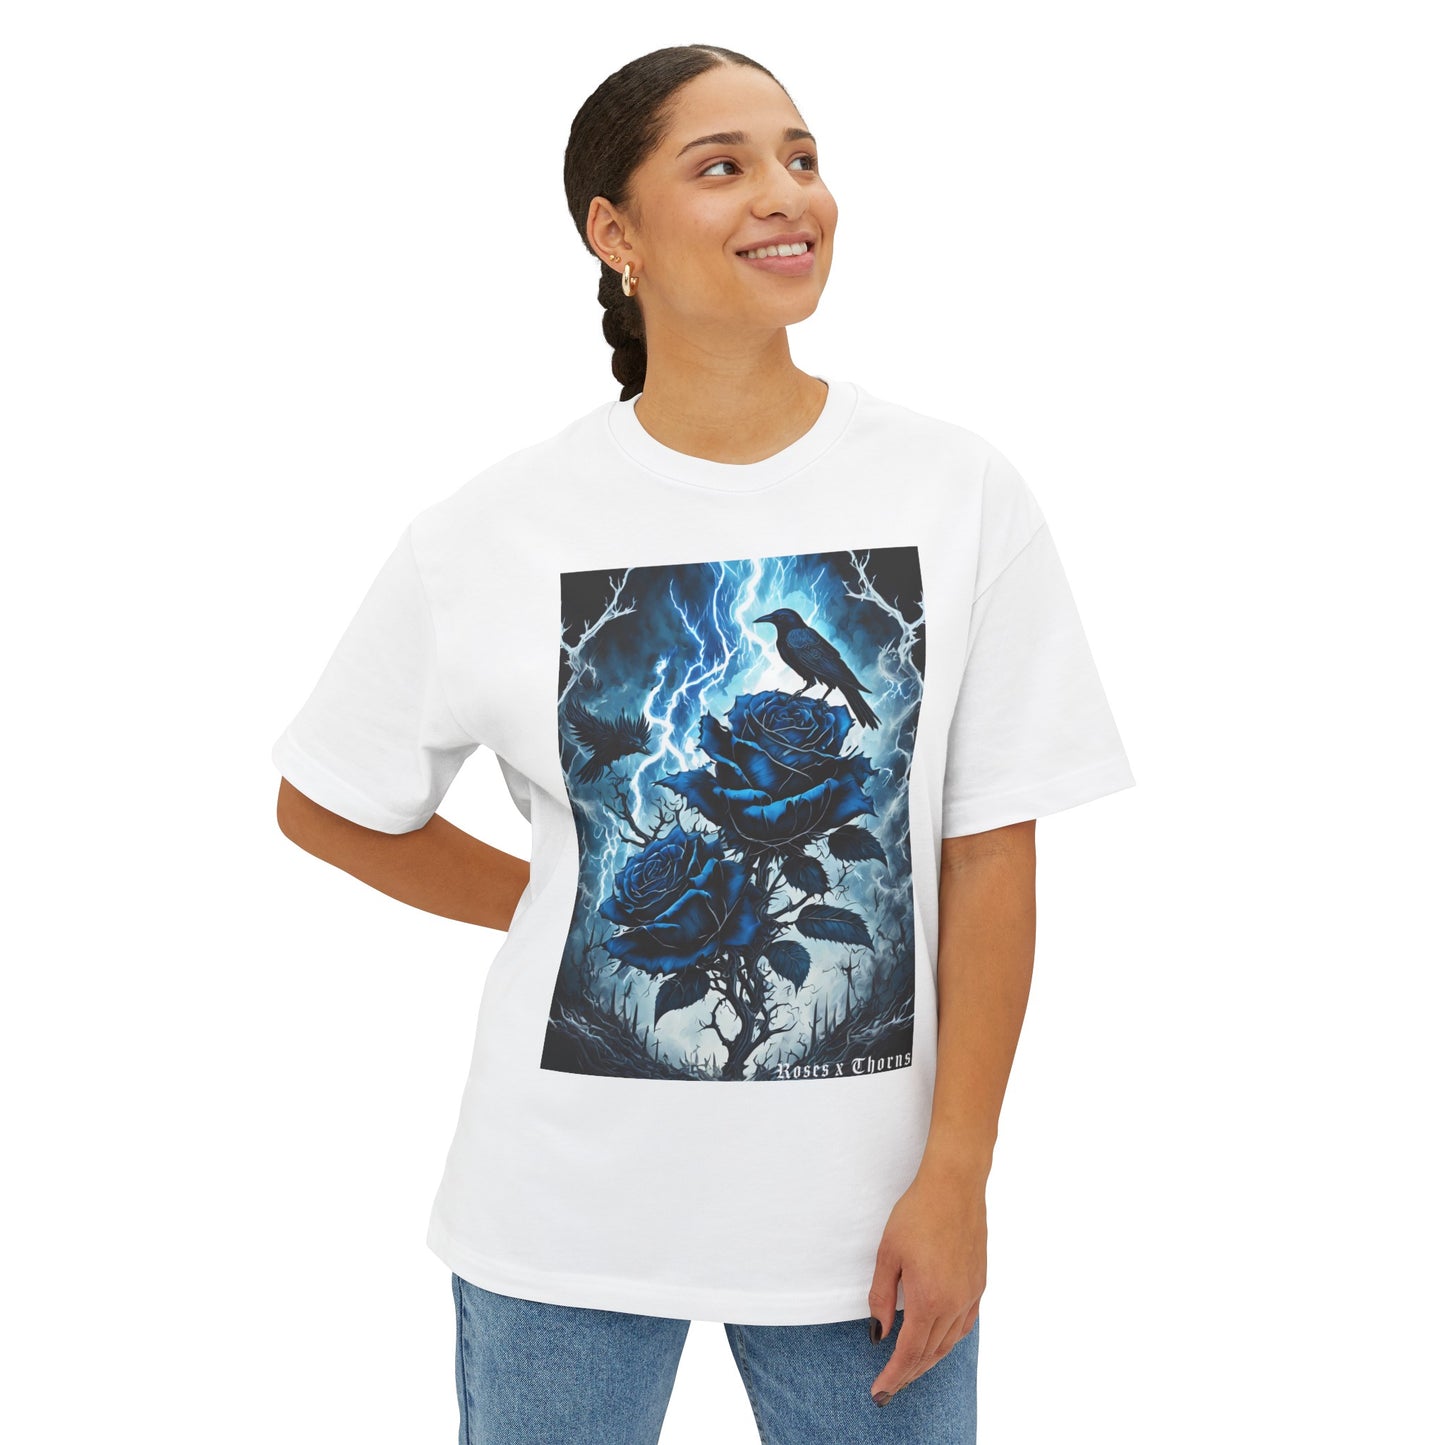 Blue Roses x Thorns Front Oversized Boxy Tee